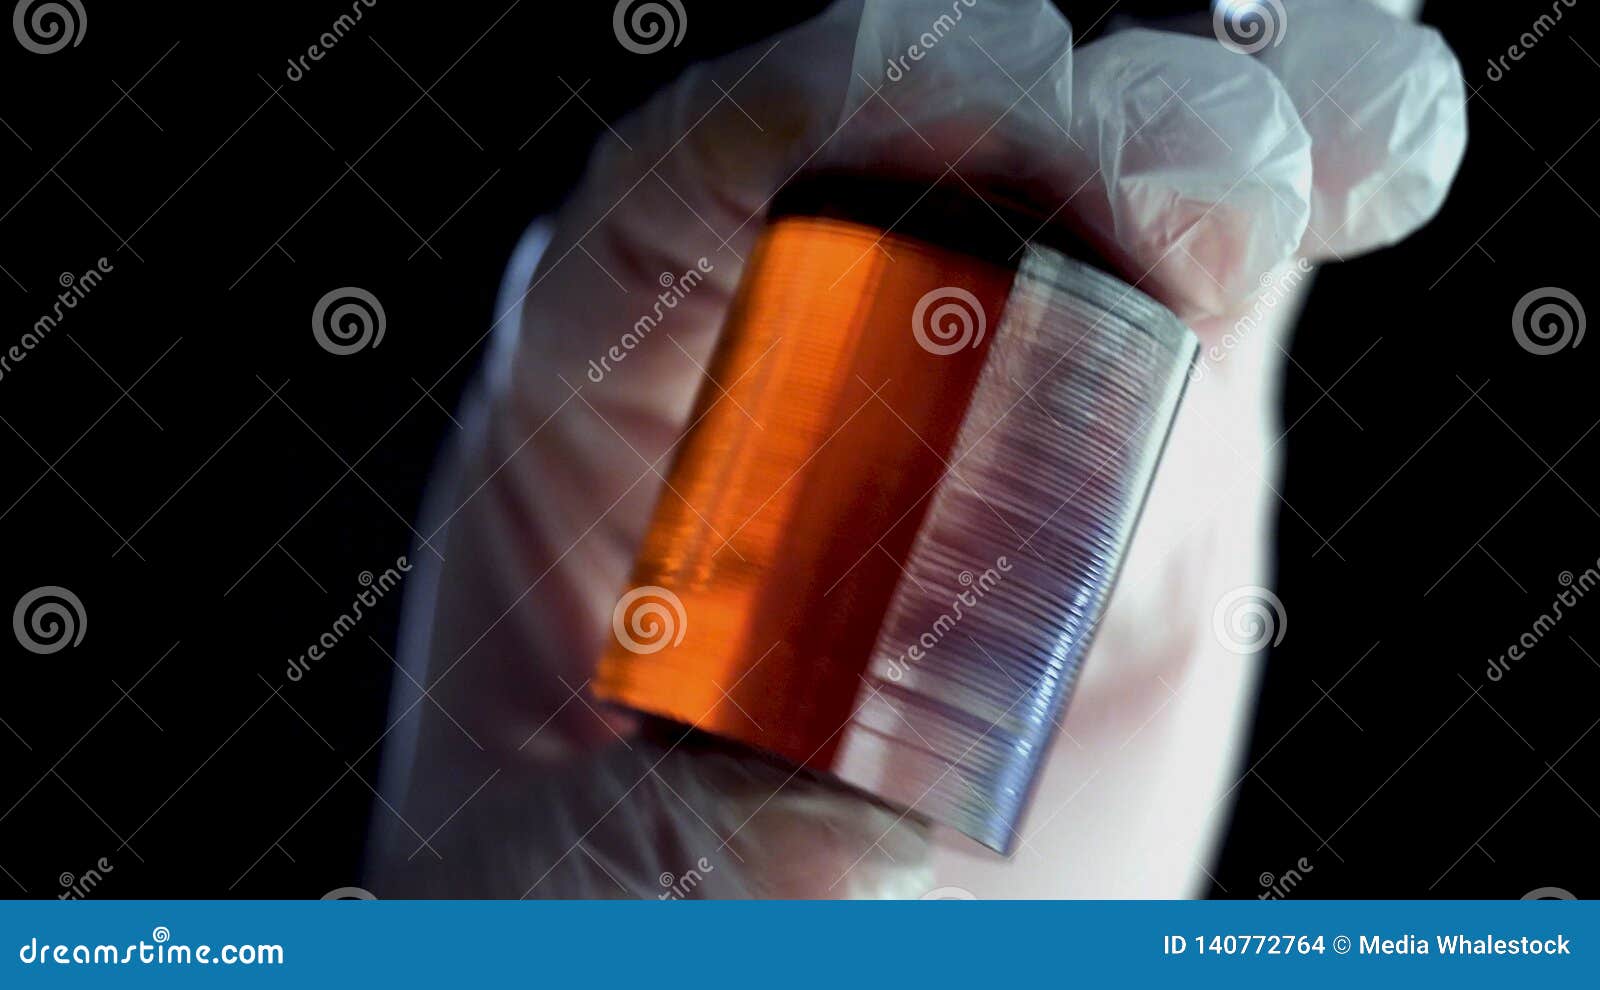 Burned Piece of Orange Mineral. Close-up of Gloved Hands Holding Piece ...